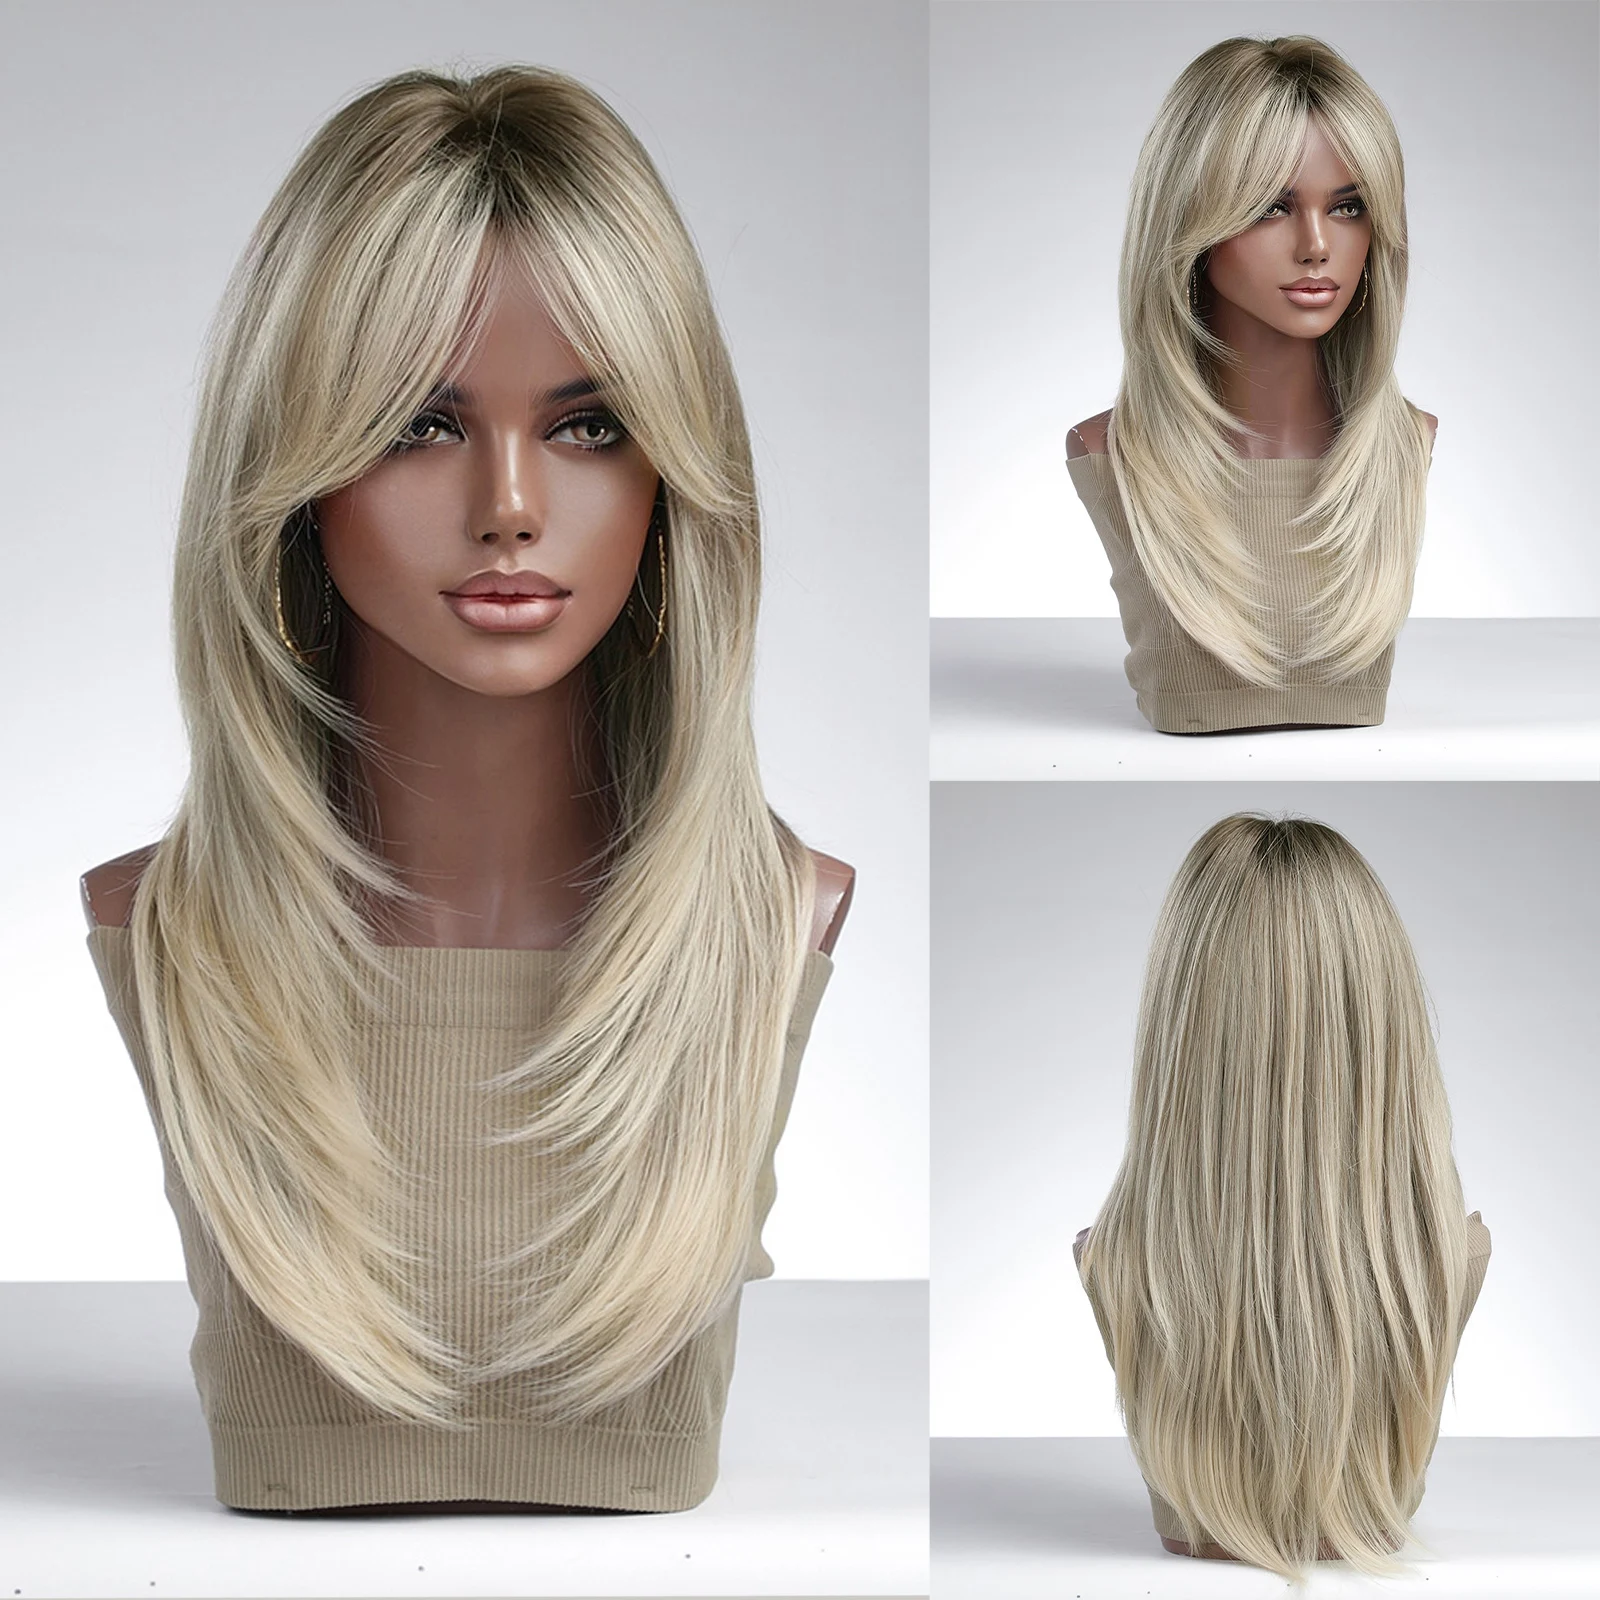 

La Sylphide Blonde Wig with Bangs Long Straight Good Quality Synthetic Wigs for Women Daily Natural Heat Resistant Hair